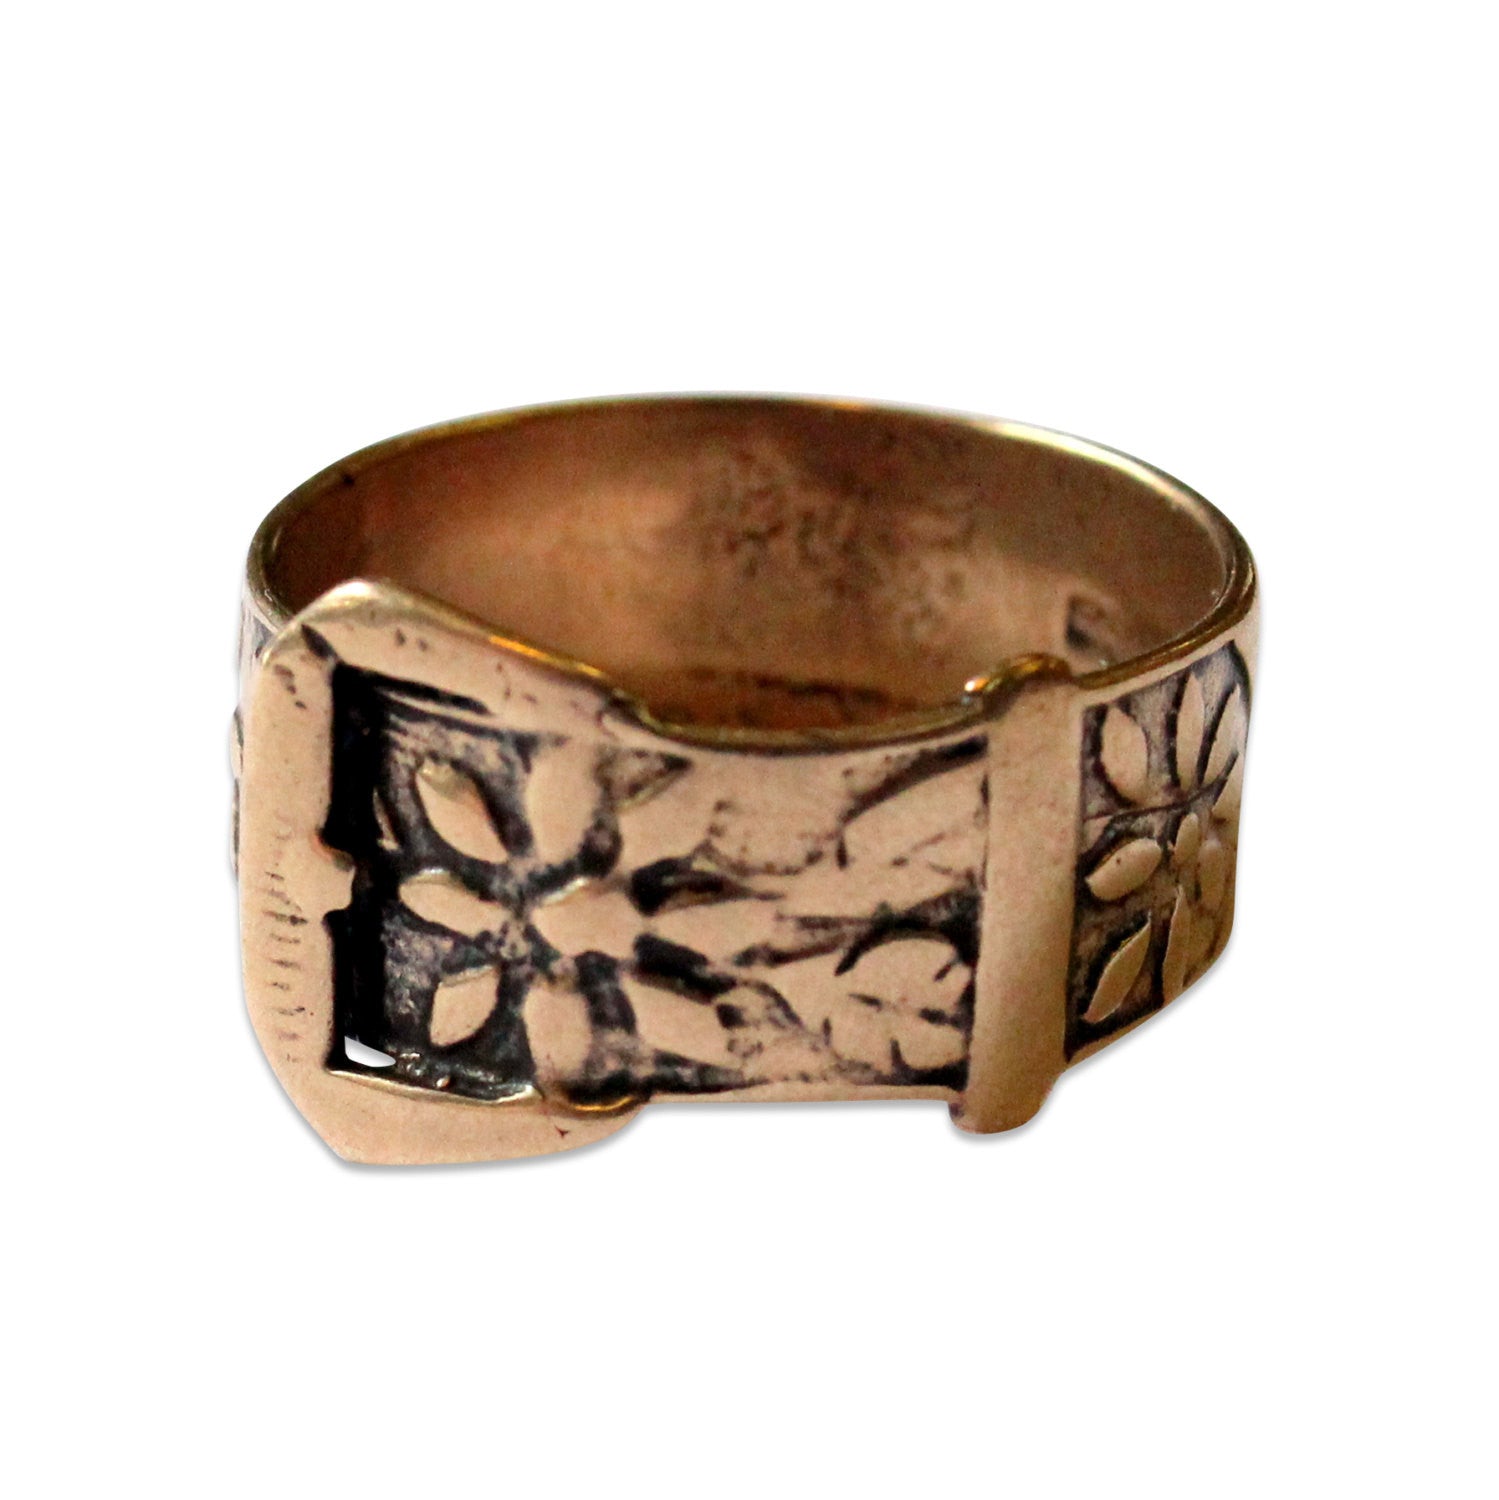 Belt Buckle Ring - Gwen Delicious Jewelry Designs